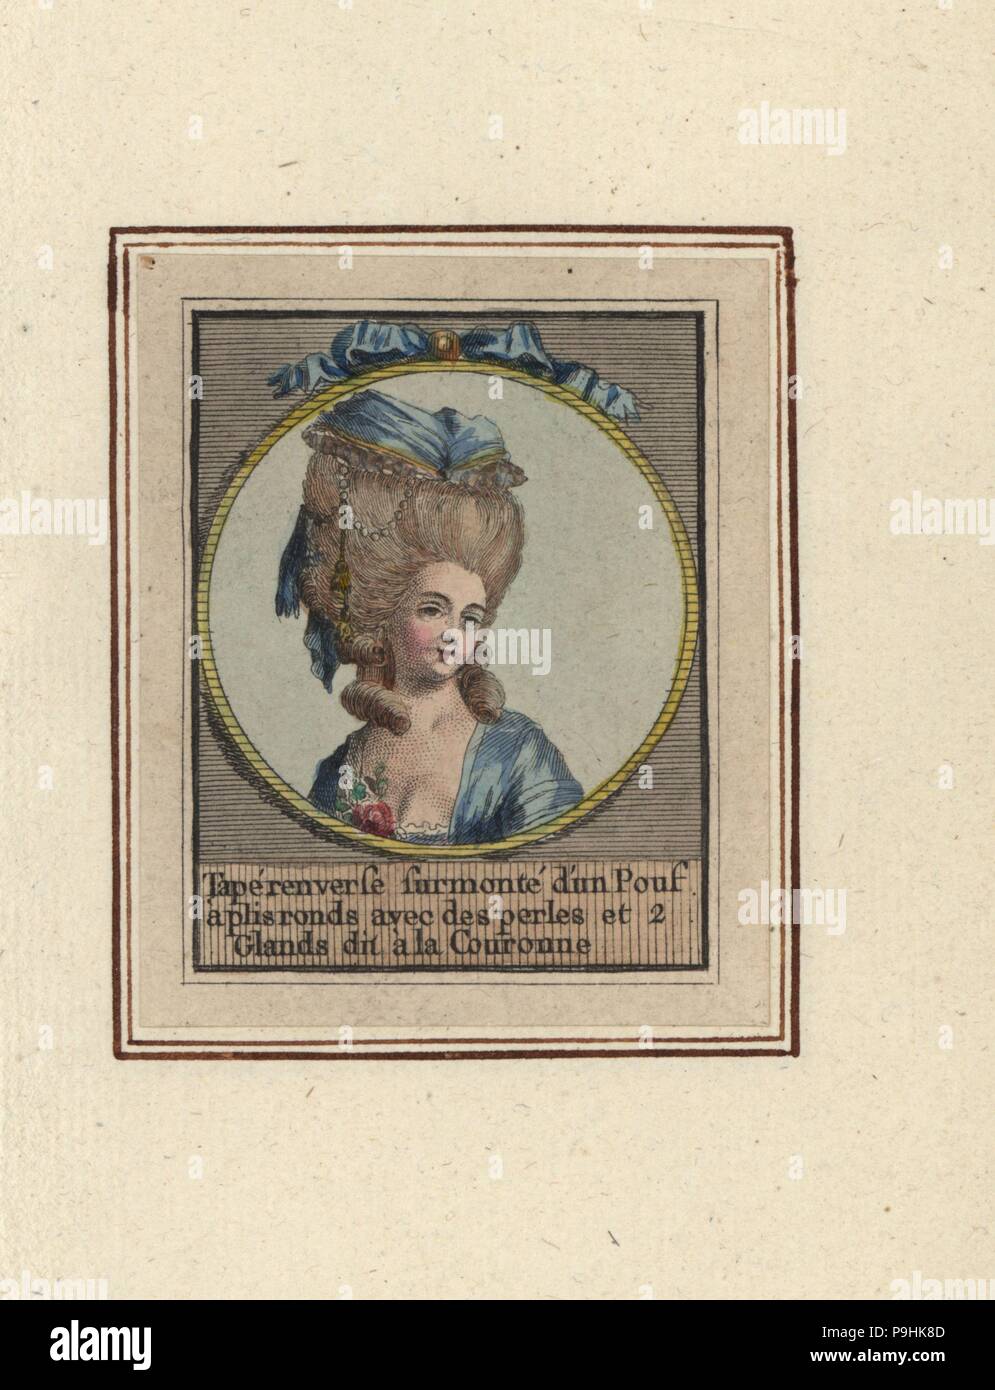 Woman in the Crown or Couronne hairdo, a backcombed hairstyle surmounted by a pouf hat with pleats, pearls and tassels. Tape renverse surmonte d'un Pouf a plis ronds avec des perles et 2 Glands dit a la Couronne. Handcoloured copperplate engraving by an unknown artist from an Album of Fashionable Hairstyles of 1783, Suite des Coeffures a la Mode en 1783, Esnauts et Rapilly, Paris, 1783. Stock Photo